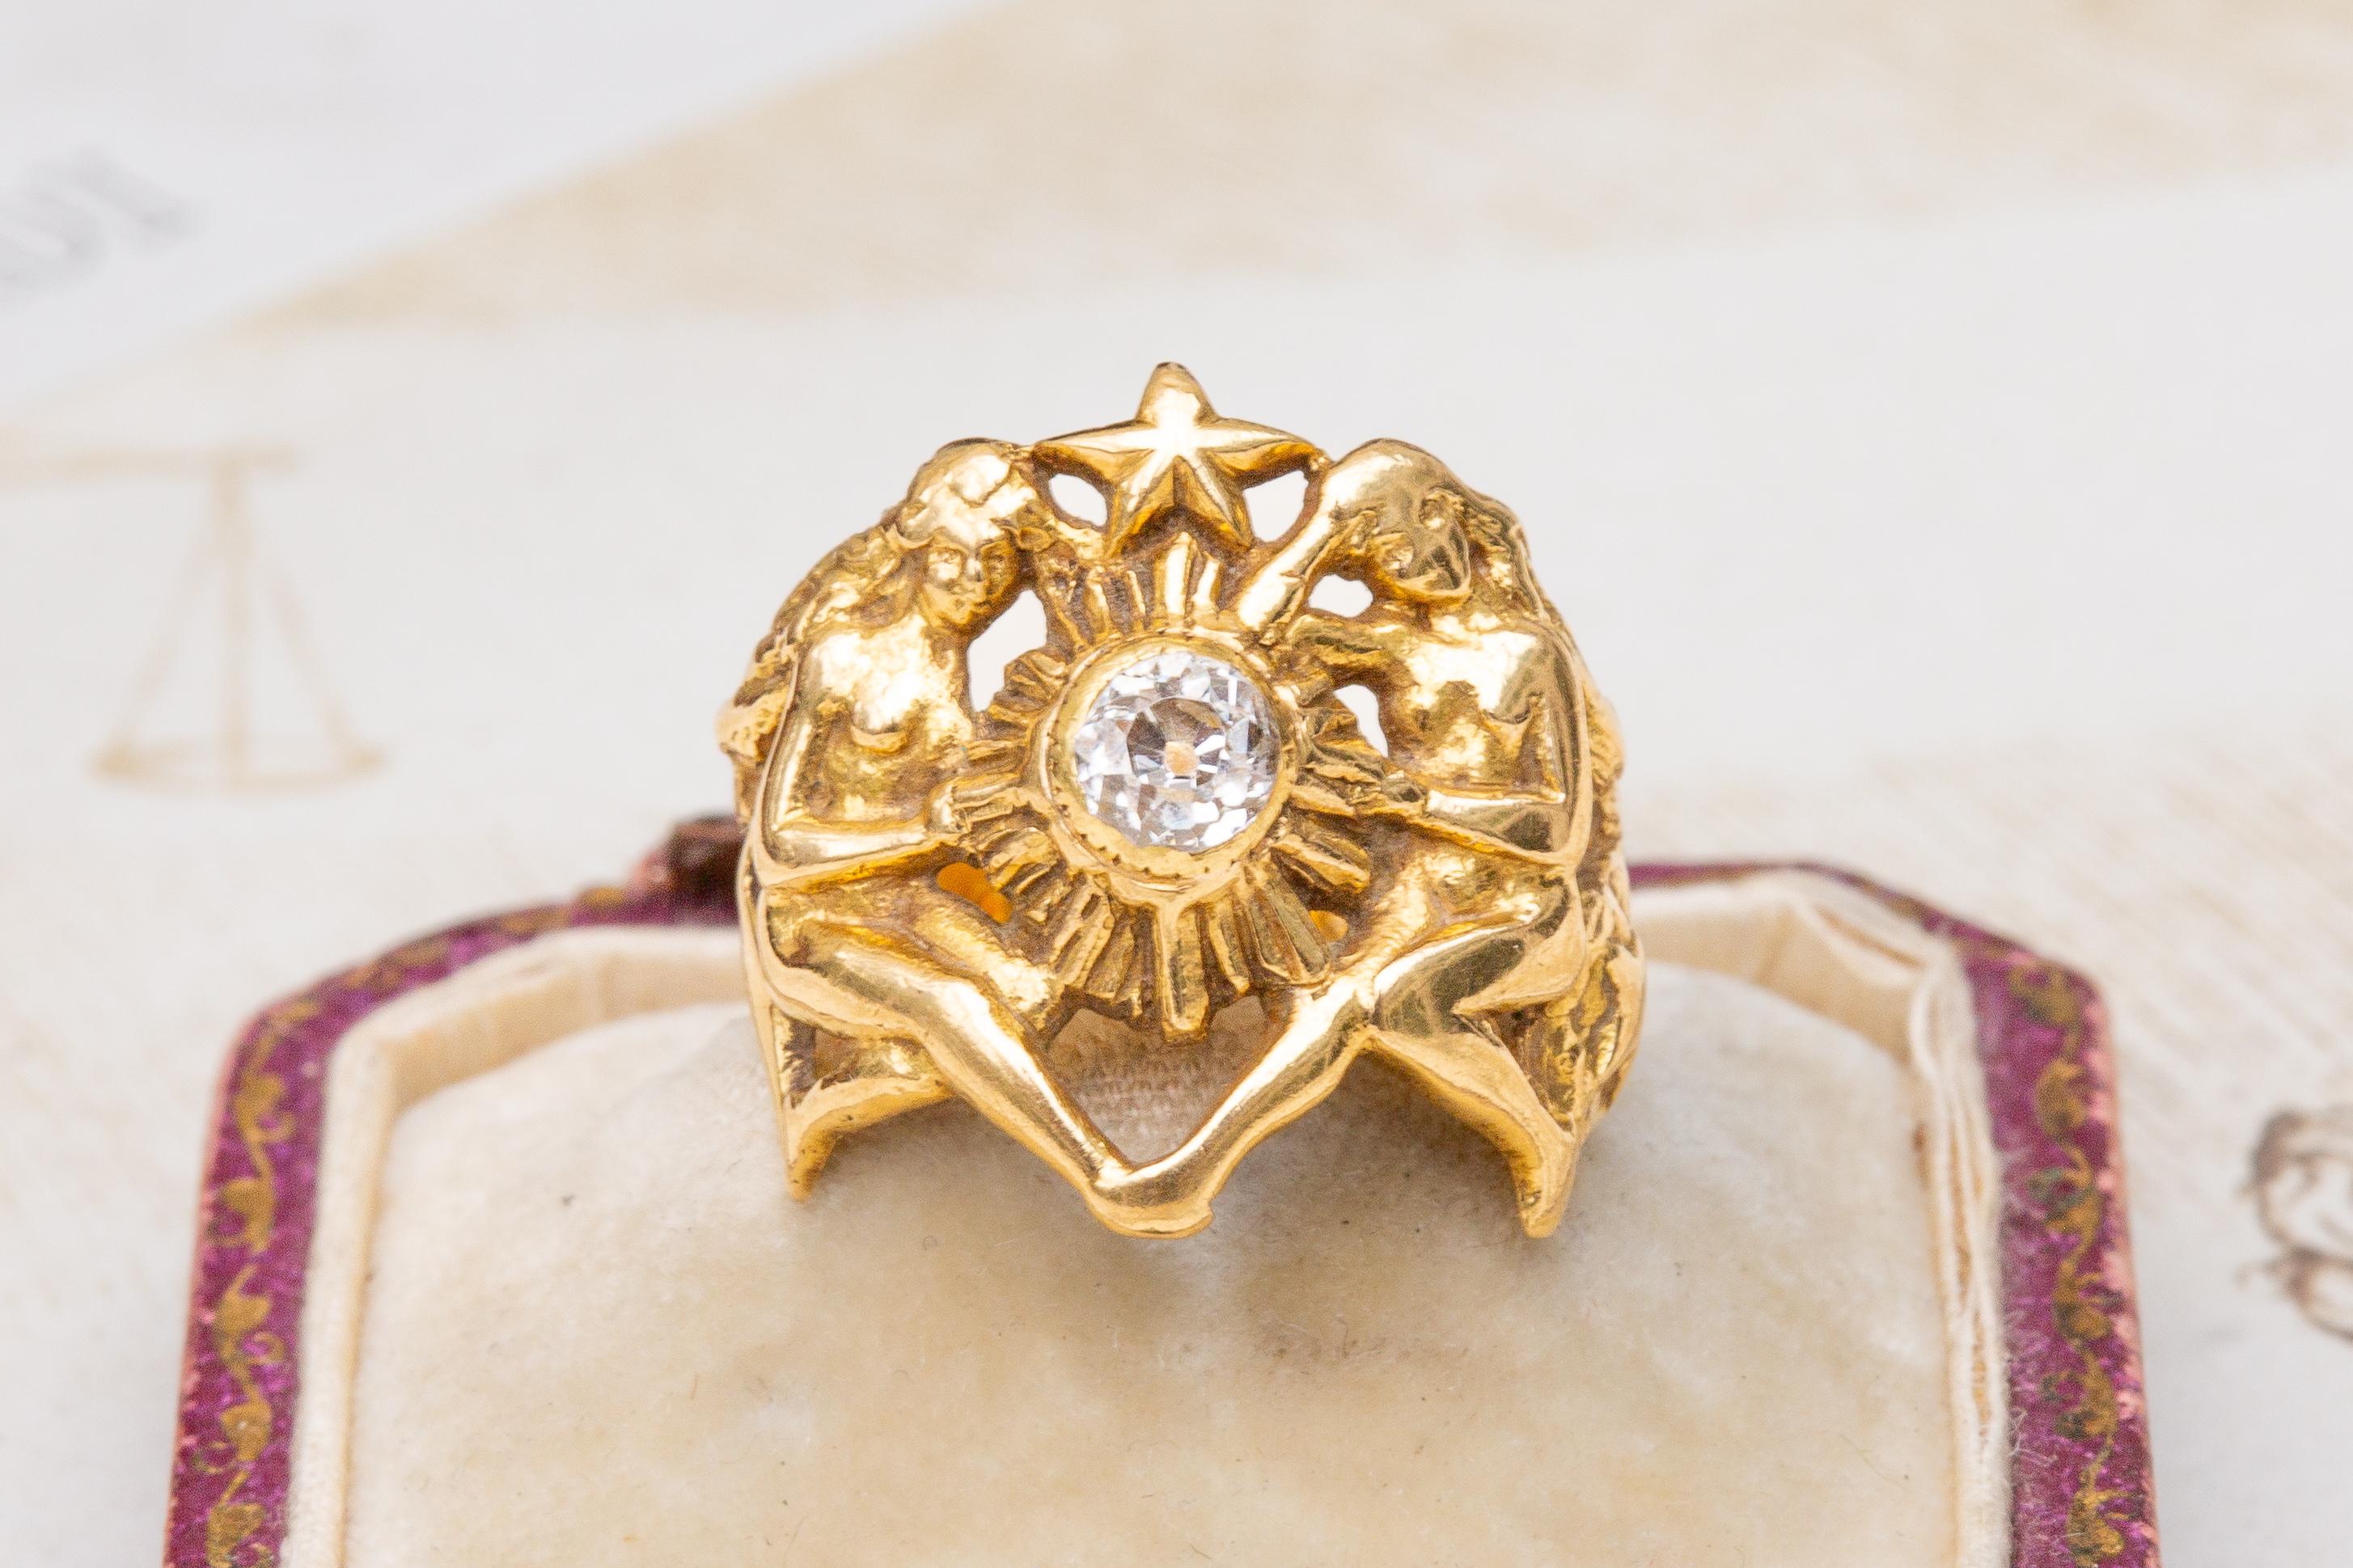 French Antique Heavy 18K Gold Ethereal Figural 0.35ct Old European Cut Diamond 5